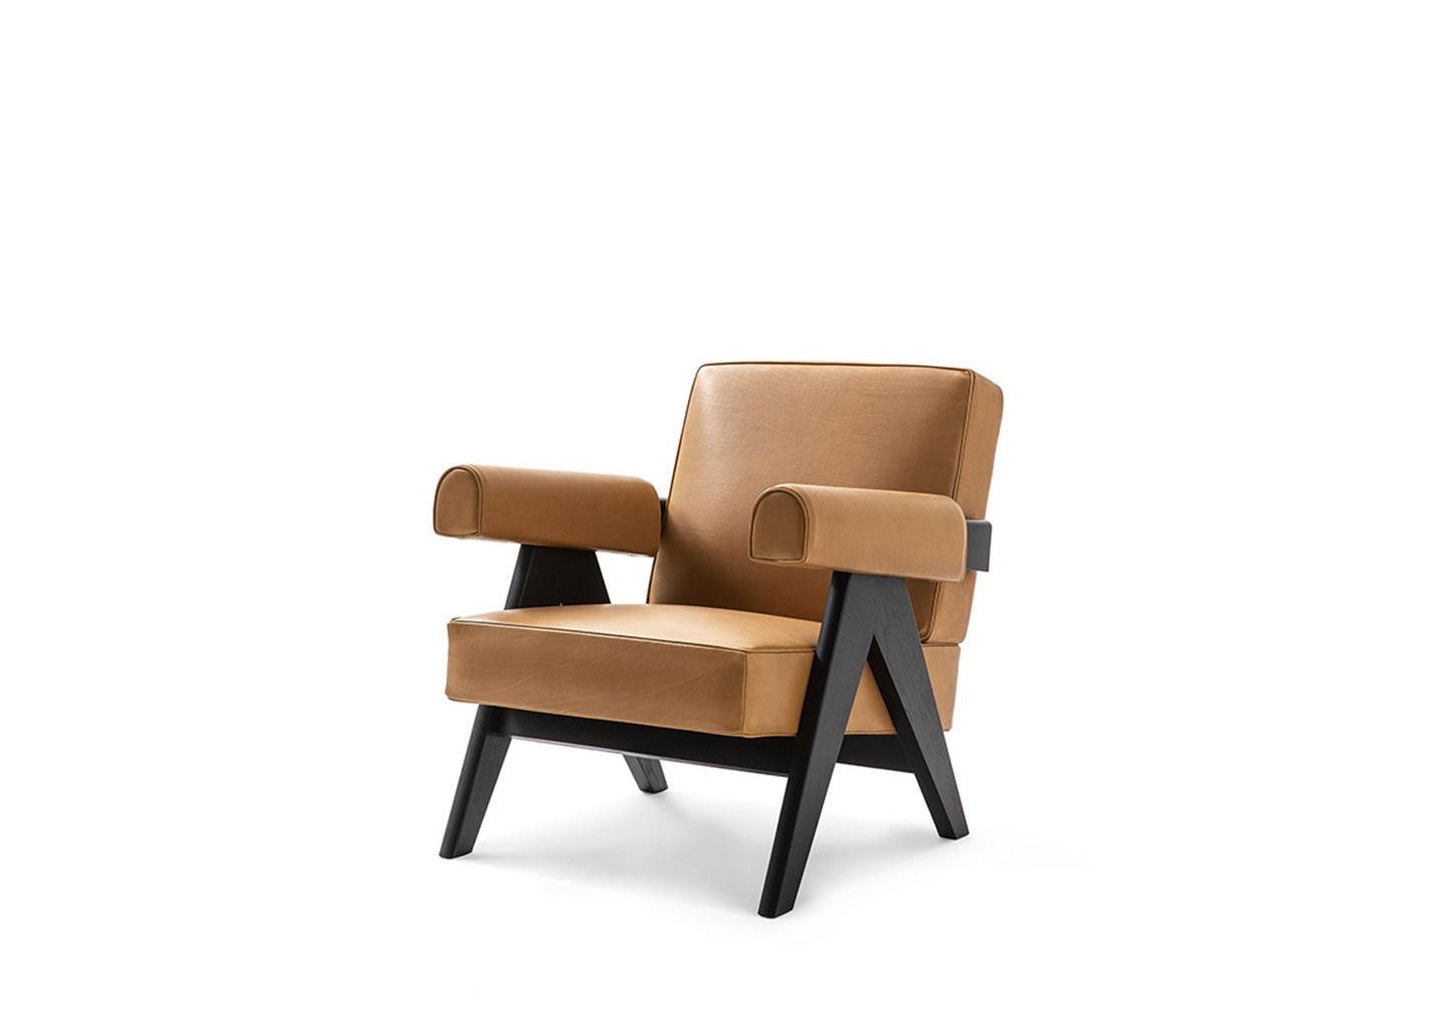 8_cassina_capitol_complex_armchair_hommage_o_pierre_jeanneret_cassina_rd